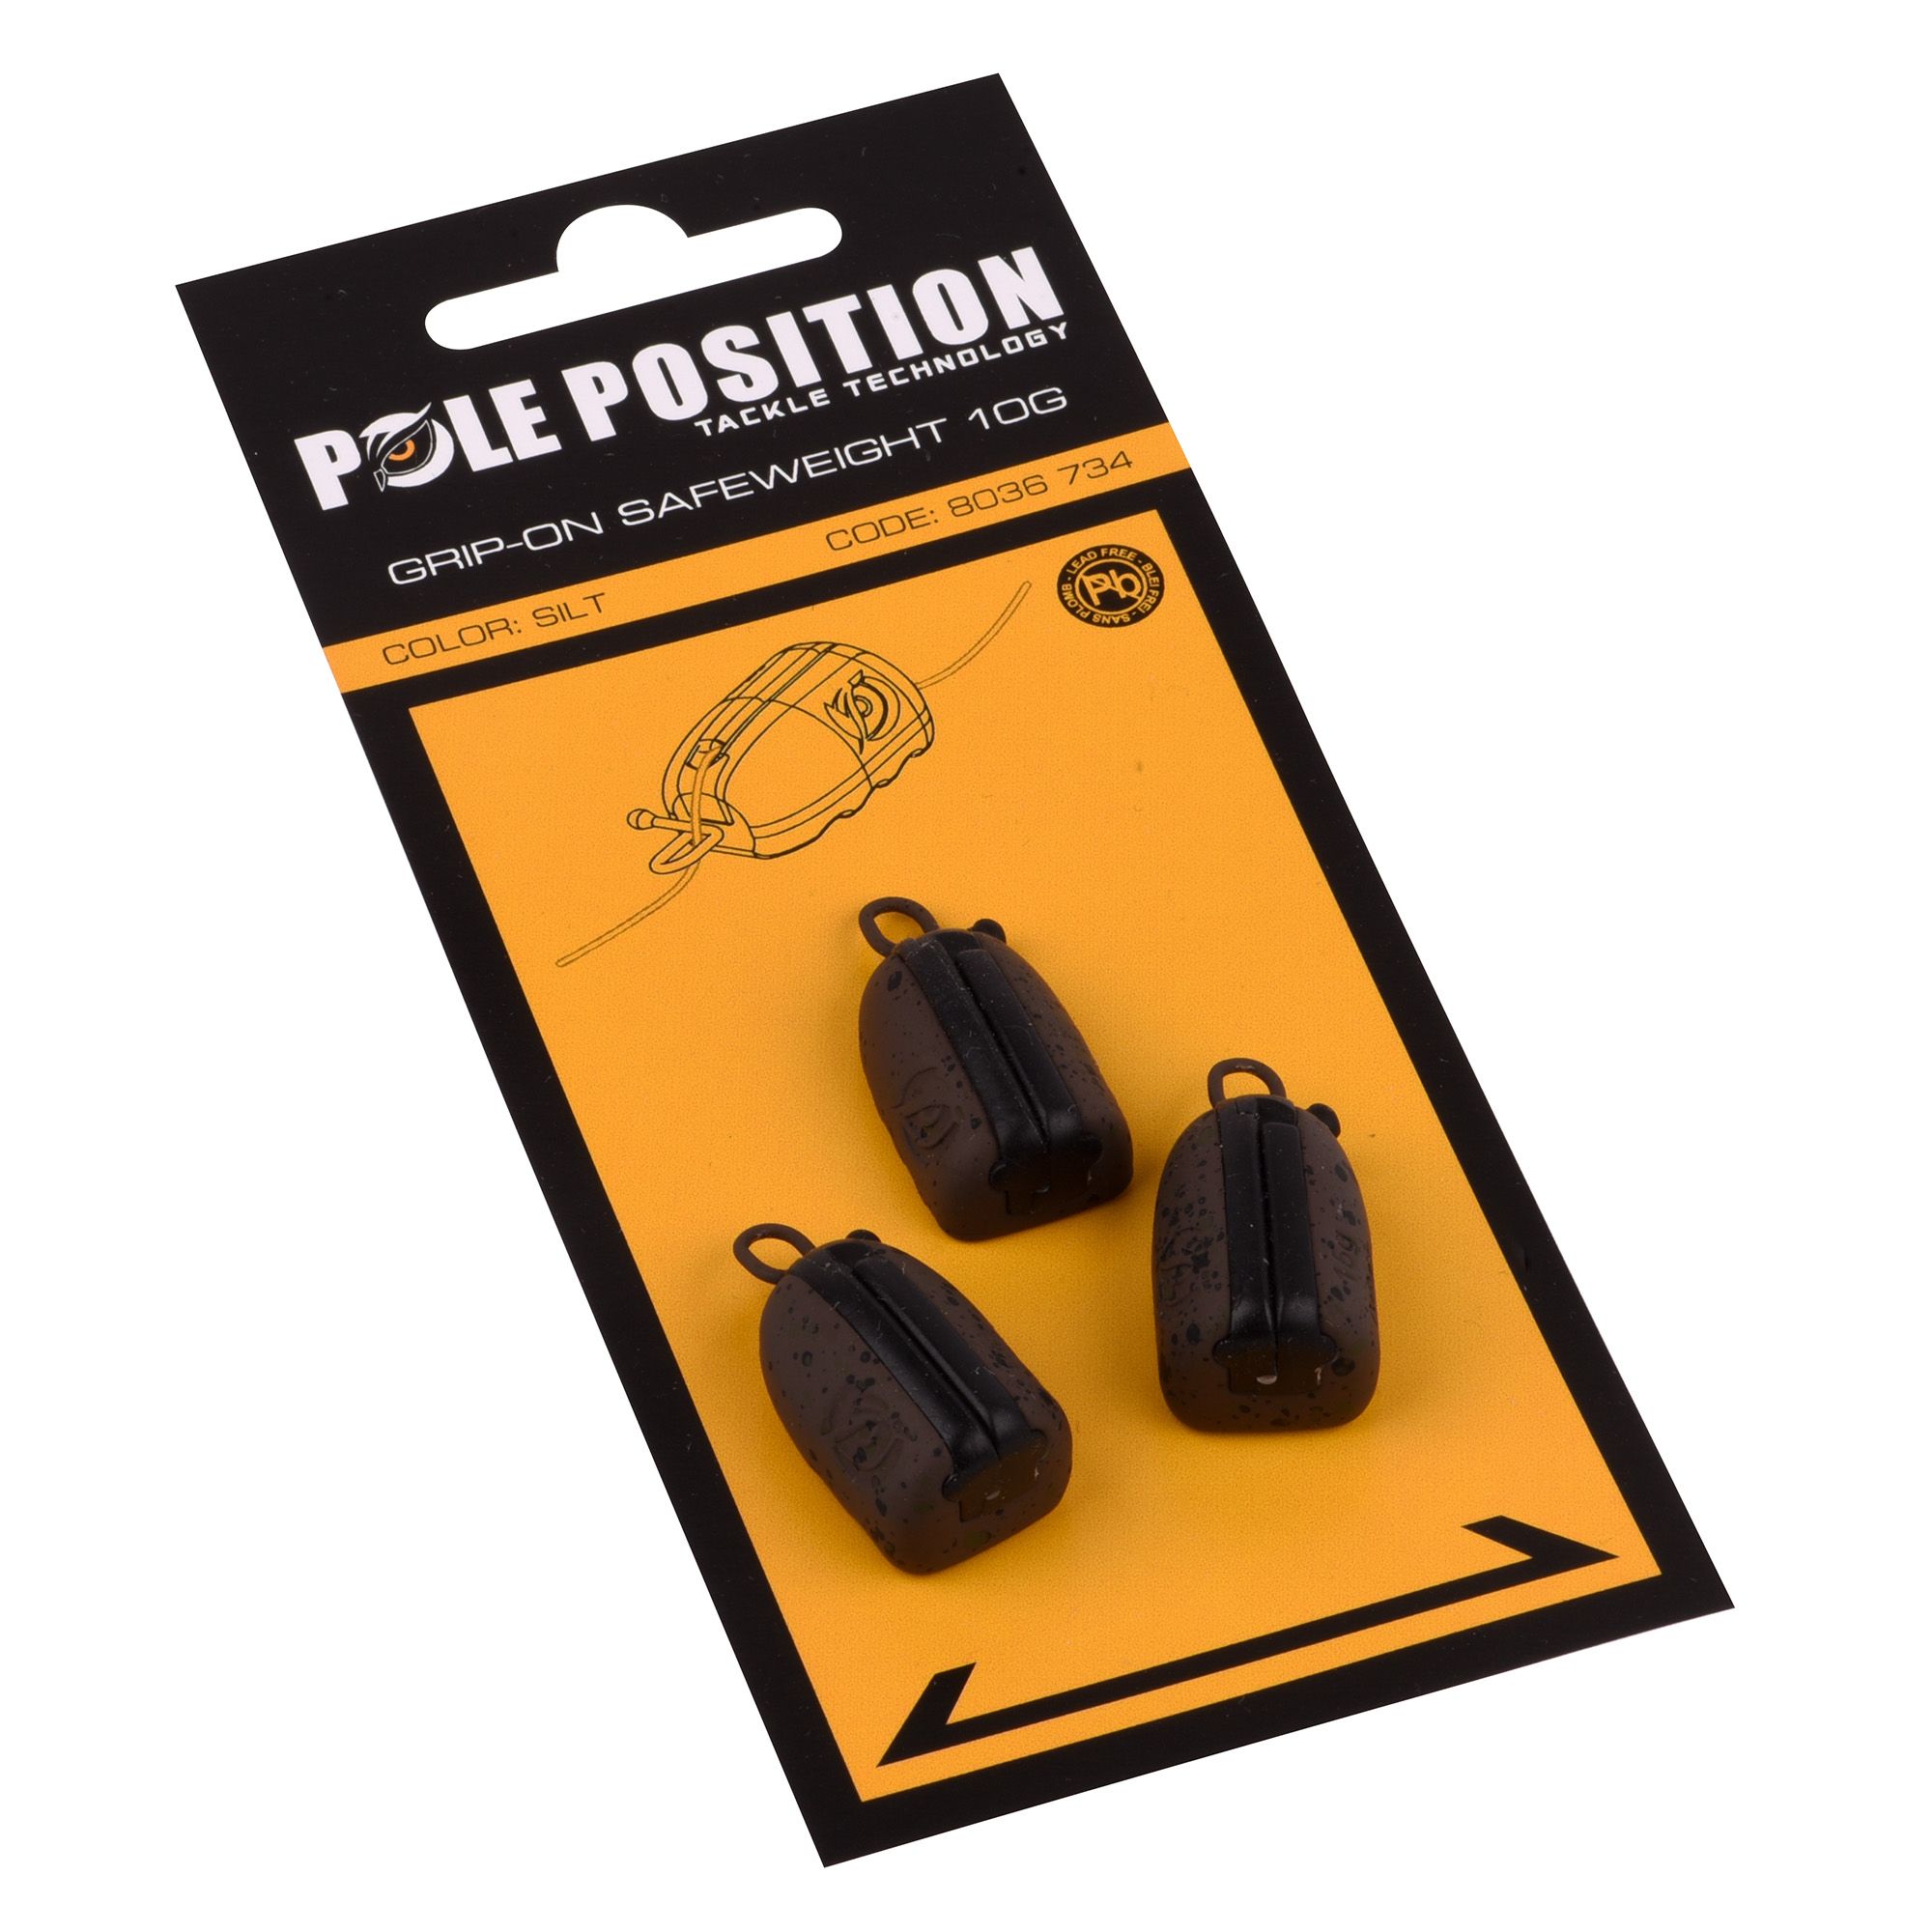 Pole Position Grip-On Safeweight 10gr